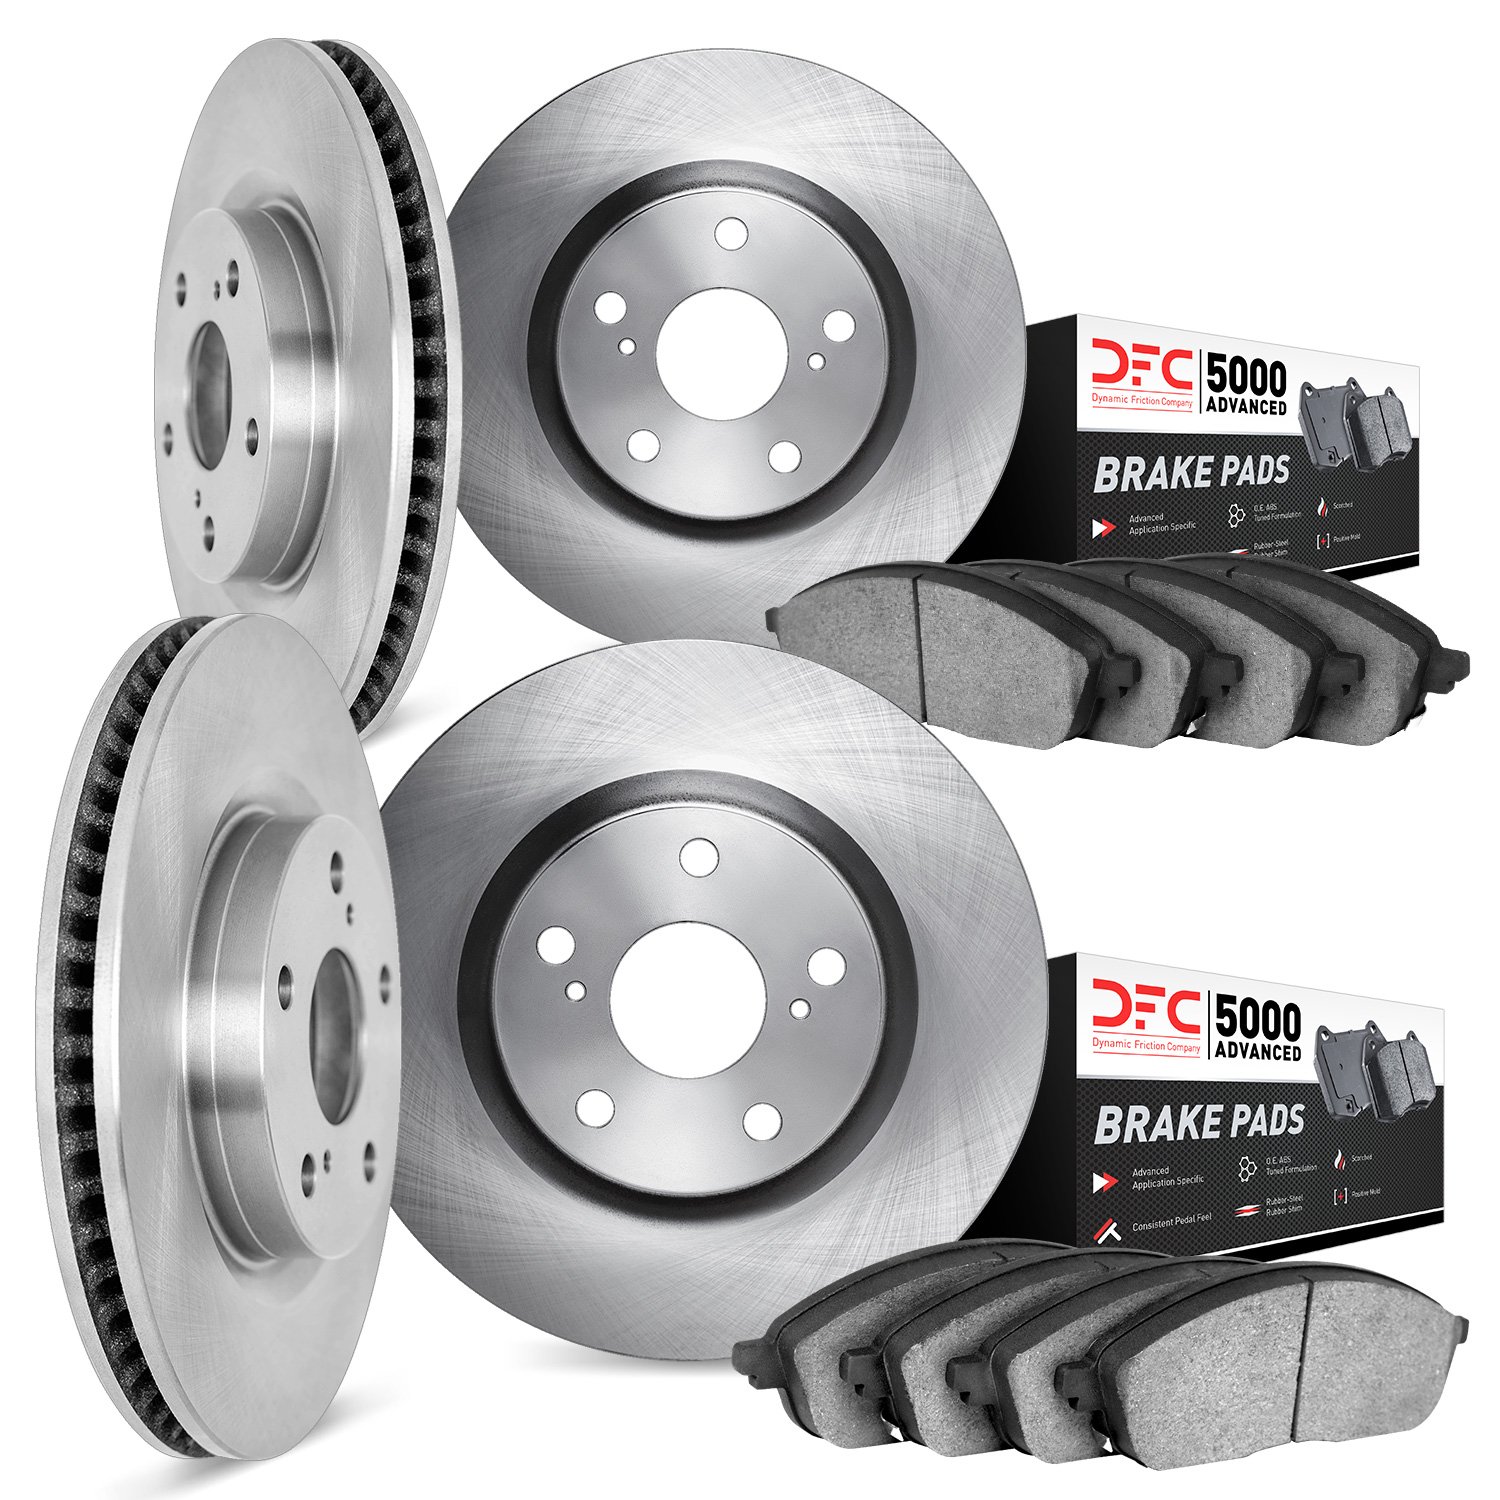 6504-31060 Brake Rotors w/5000 Advanced Brake Pads Kit, 2012-2016 BMW, Position: Front and Rear